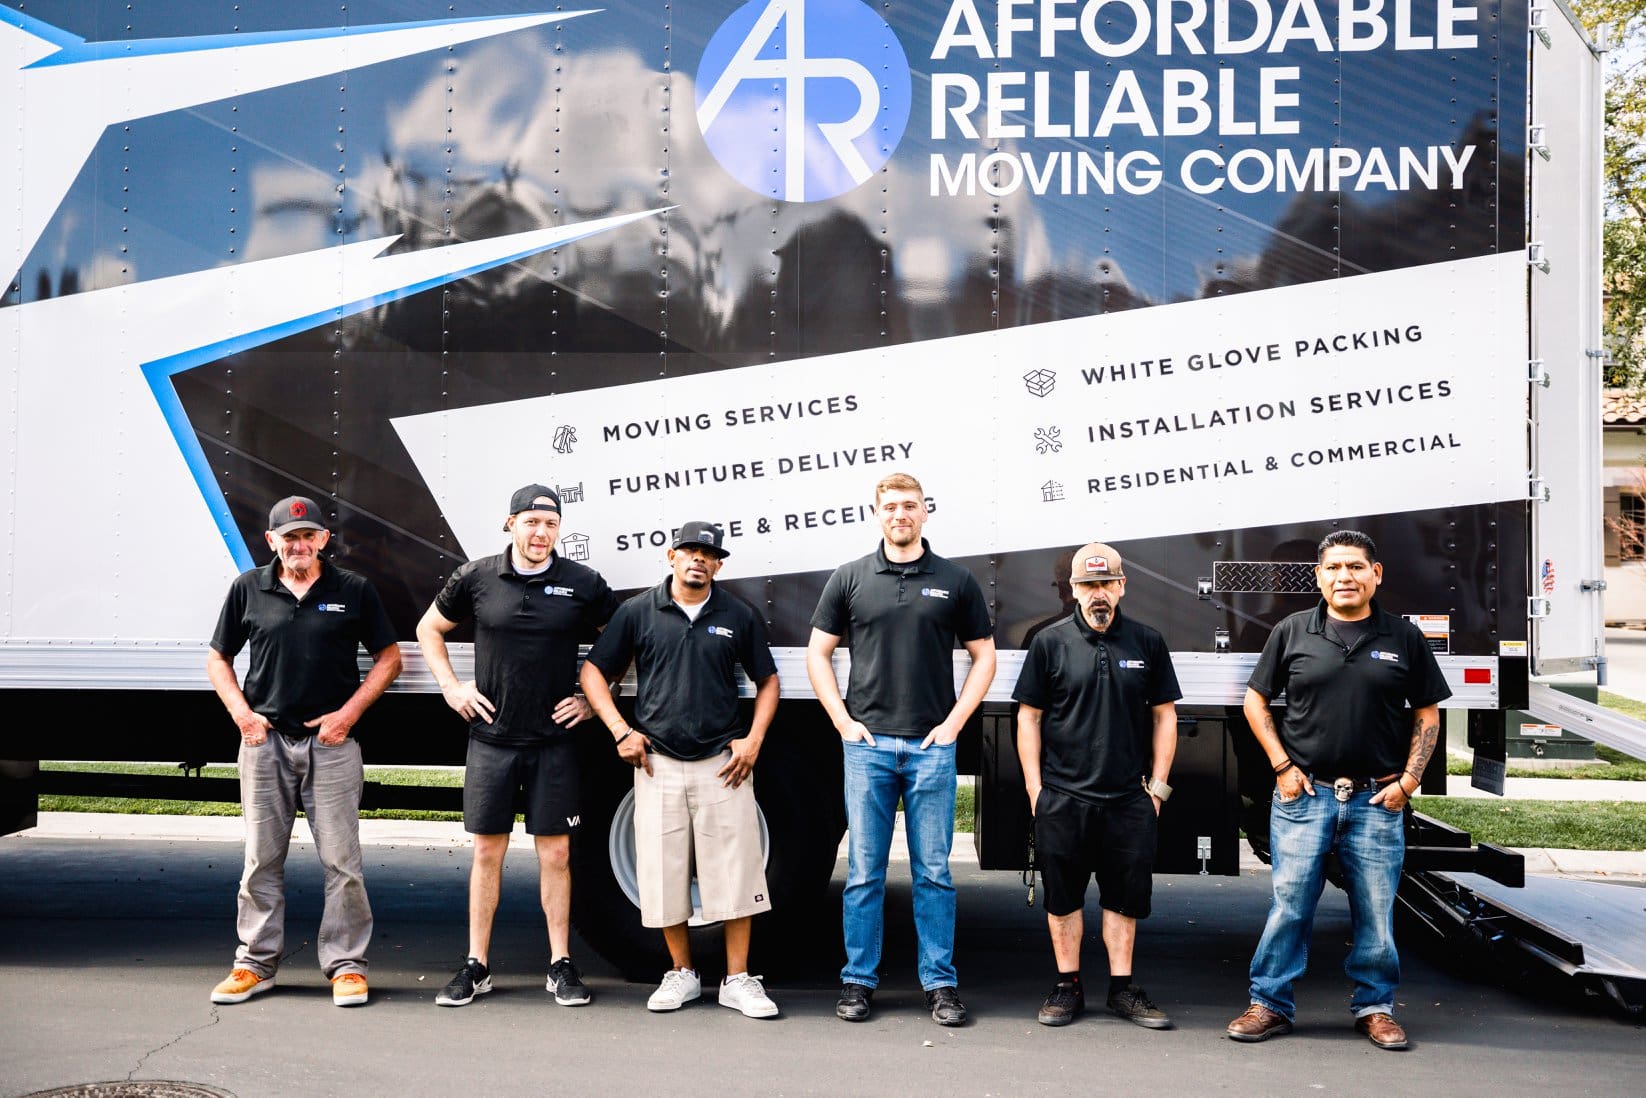 Affordable Reliable Moving Company - Aliso Viejo, CA, US, local movers